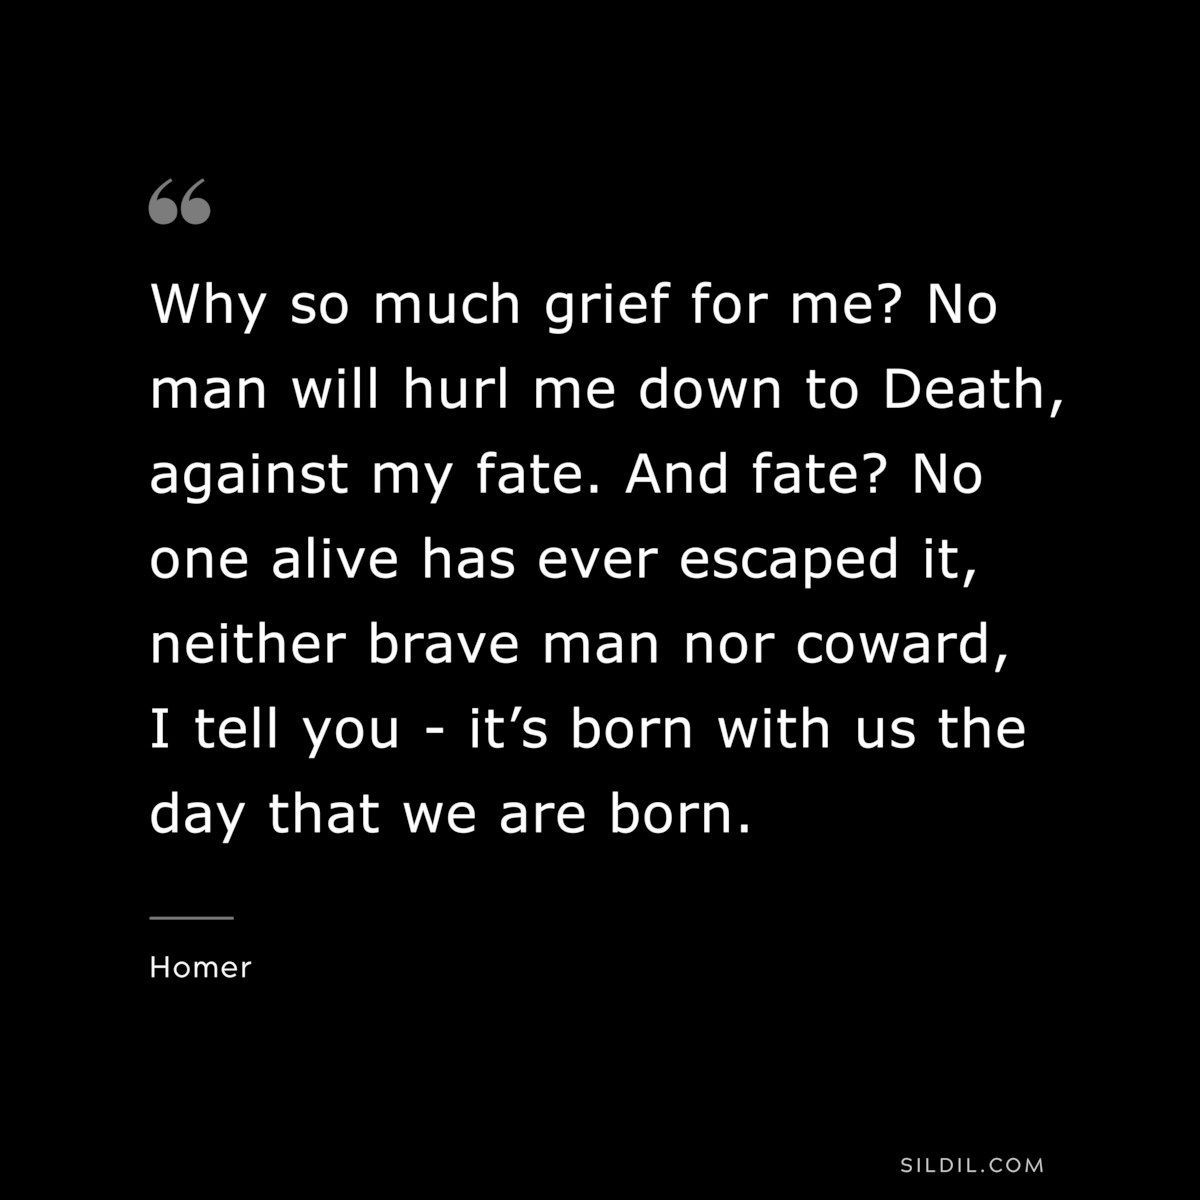 Why so much grief for me? No man will hurl me down to Death, against my fate. And fate? No one alive has ever escaped it, neither brave man nor coward, I tell you - it’s born with us the day that we are born. ― Homer